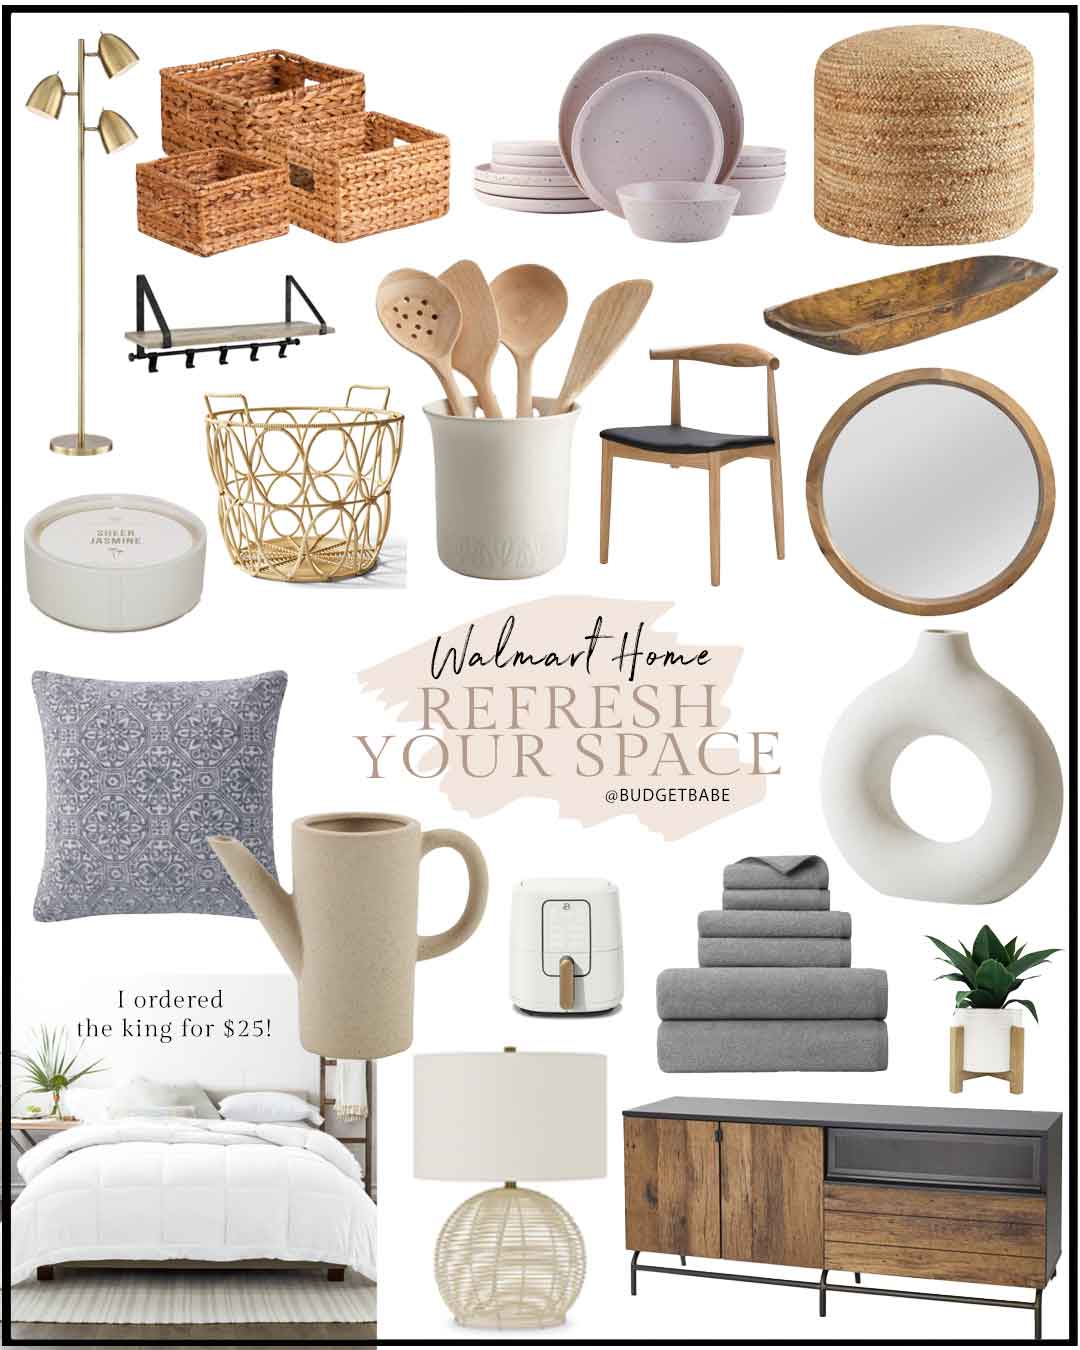 Walmart Home decor, furniture, home organization finds for the New Year on a budget